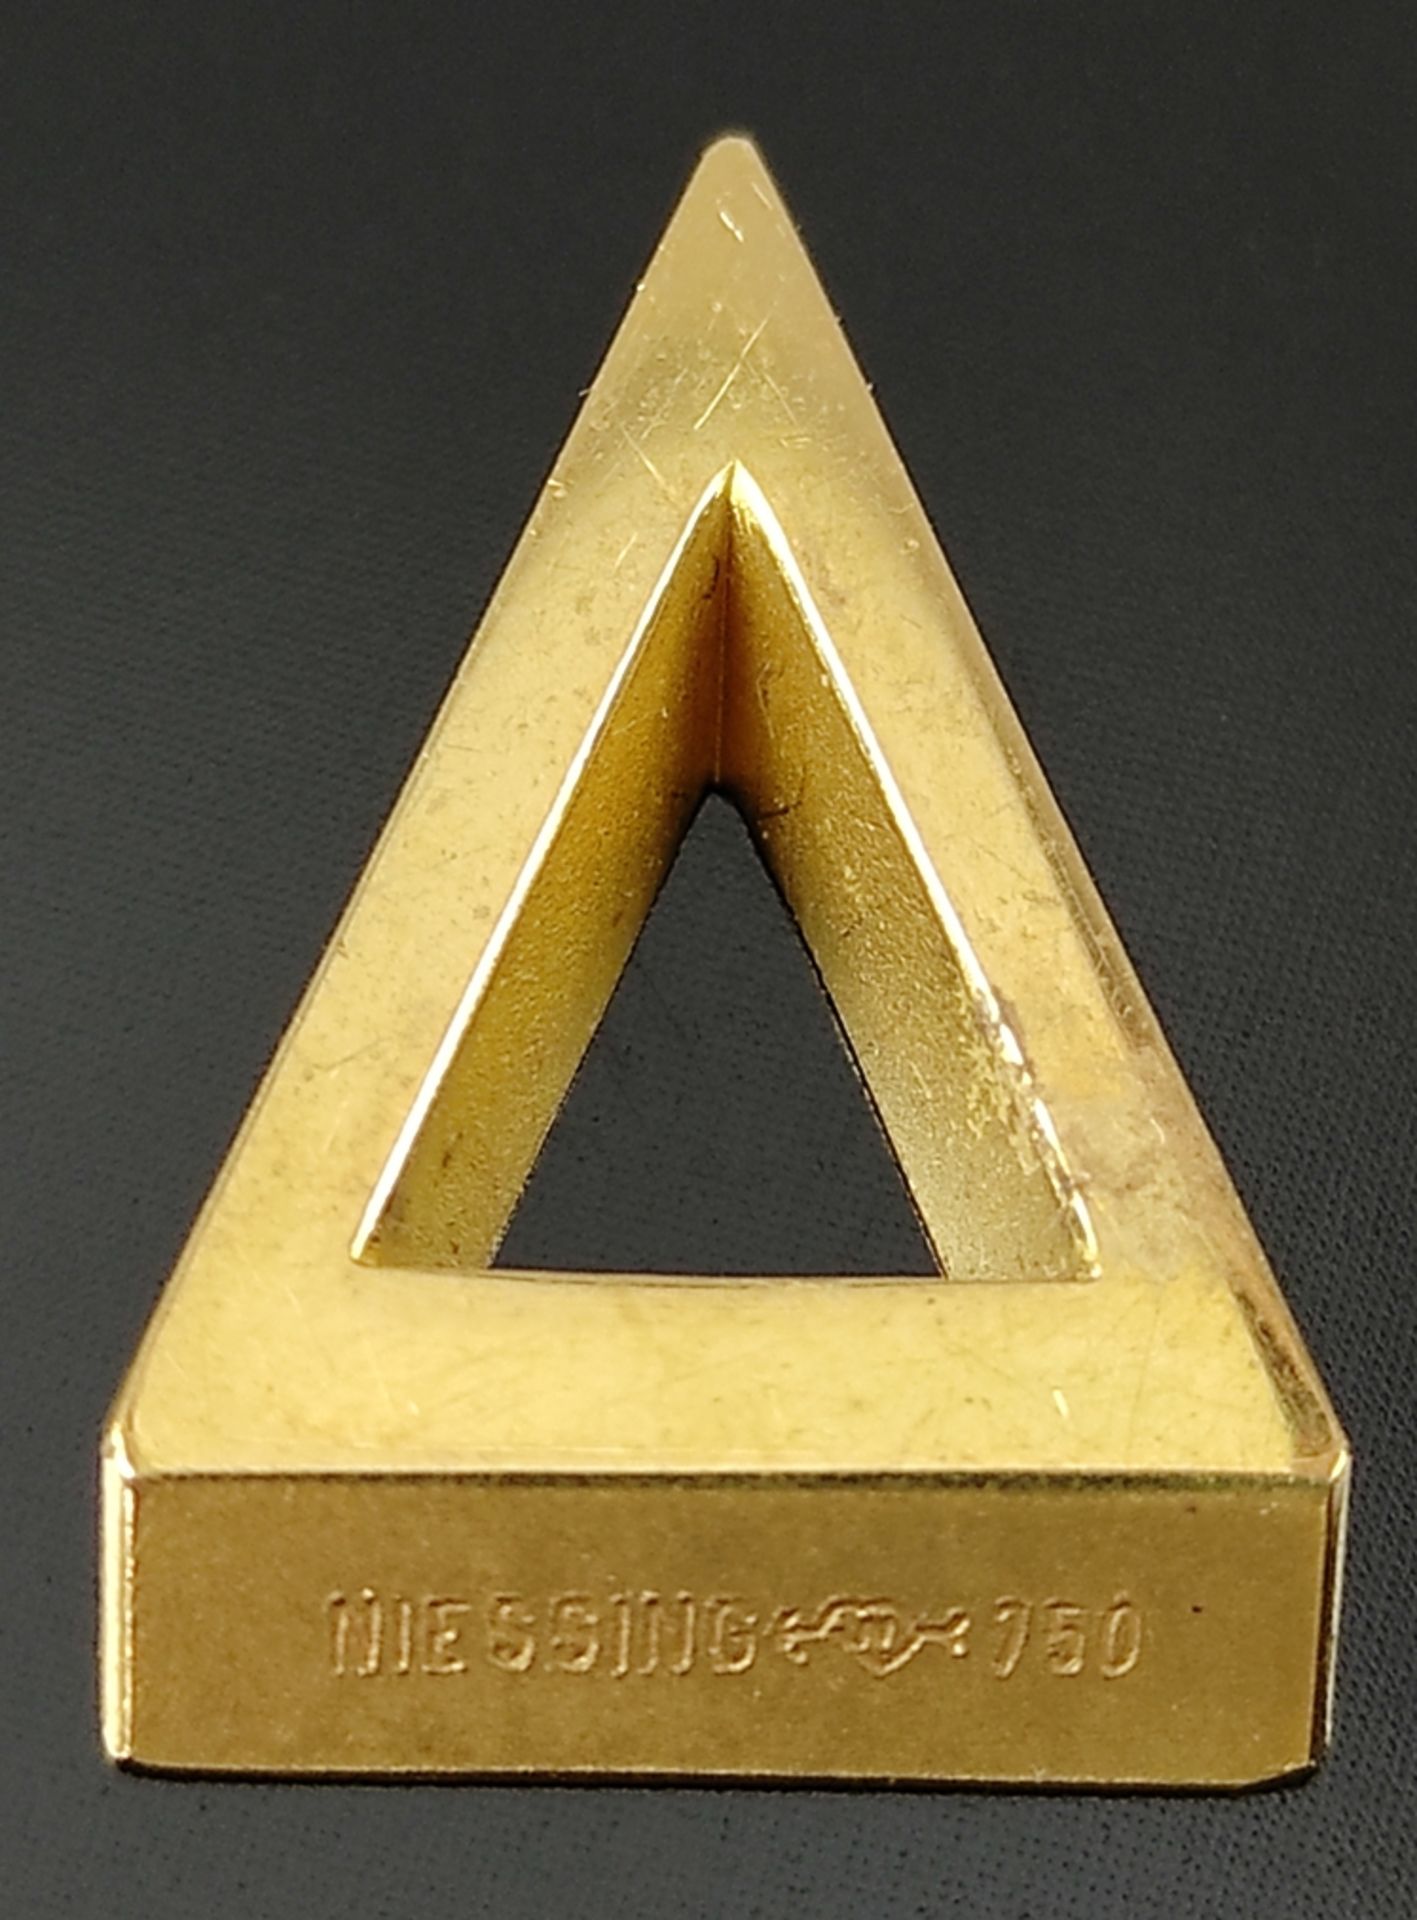 Niessing pendant, as triangle, sides matted, front and back shiny, maker's mark, 750/18K yellow gol - Image 2 of 2